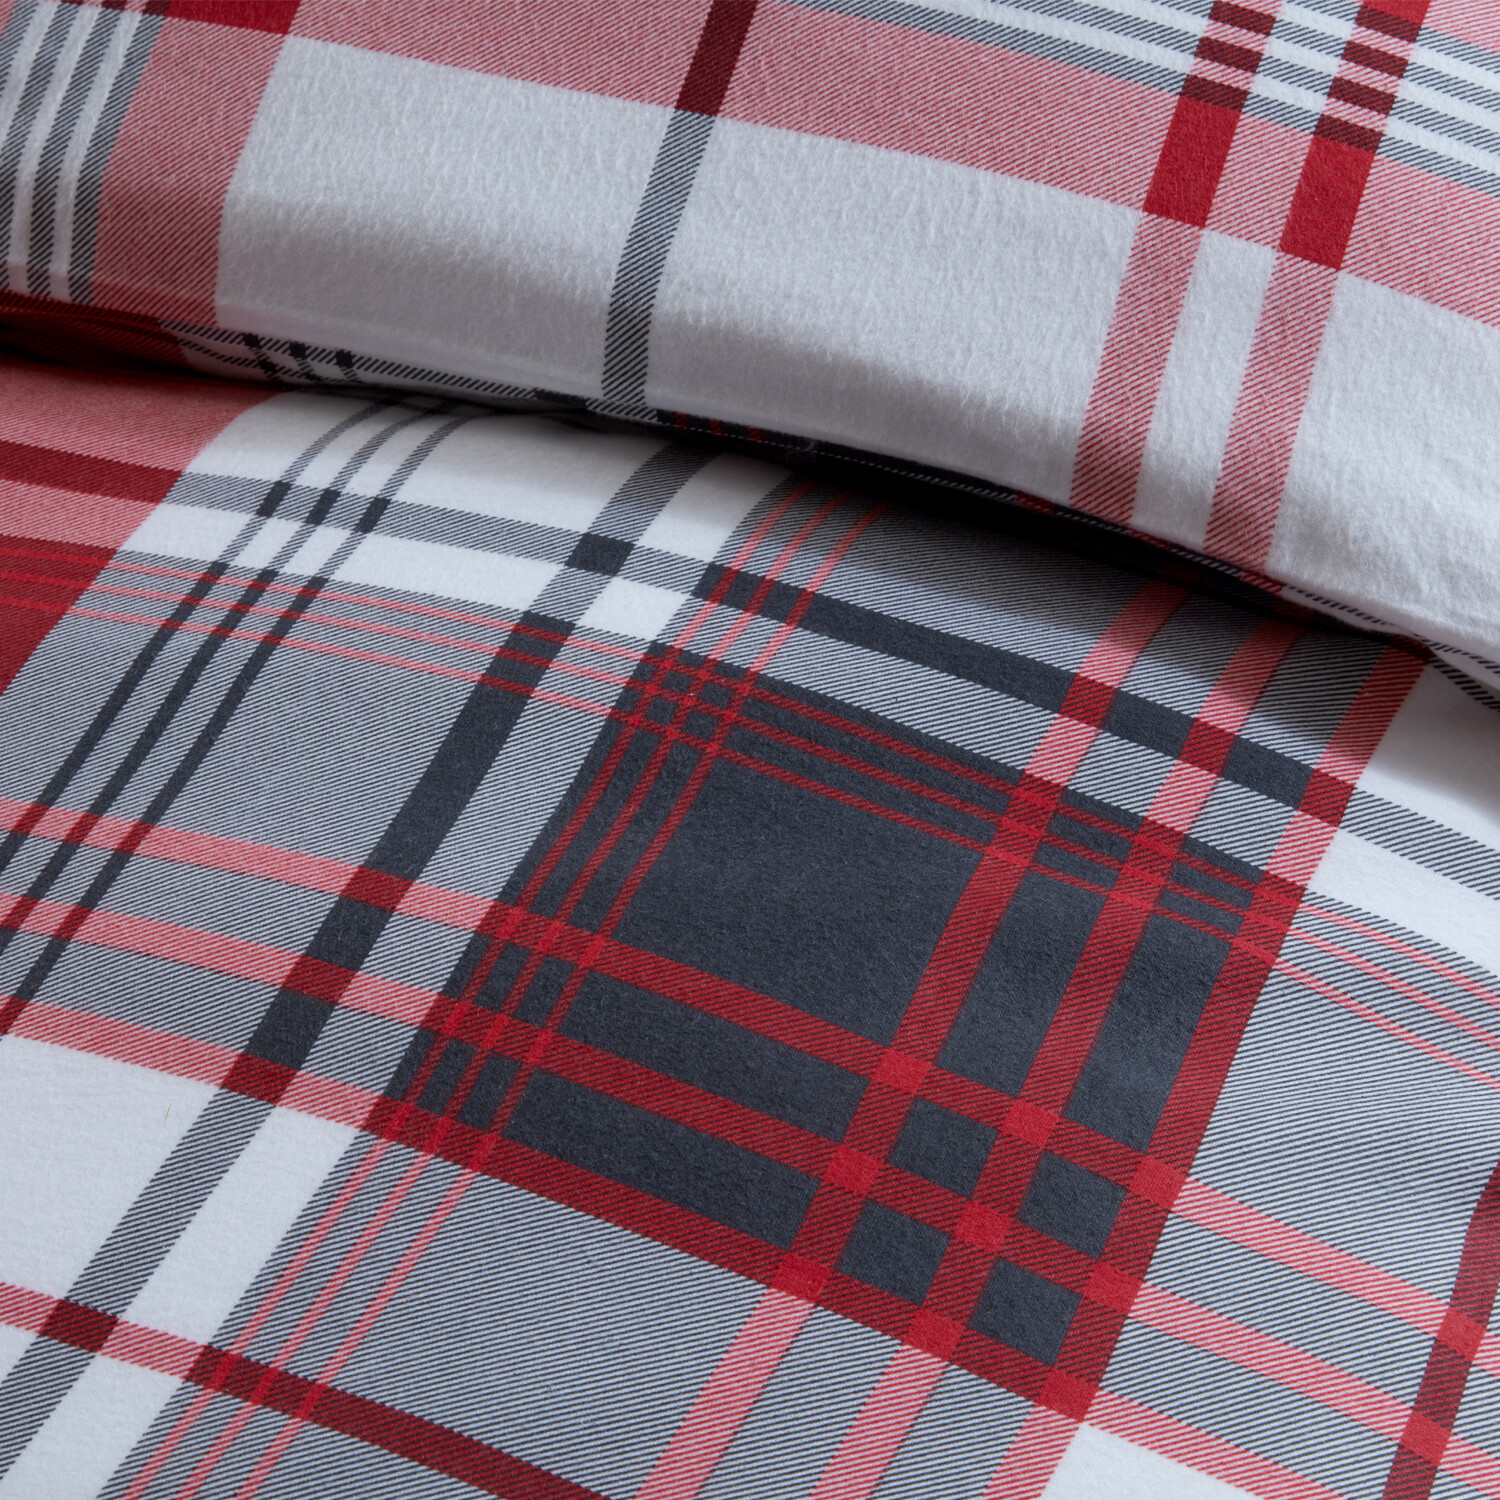 Hamilton Grey Check Duvet Cover and Pillowcase Set - Red / Super King size Image 3